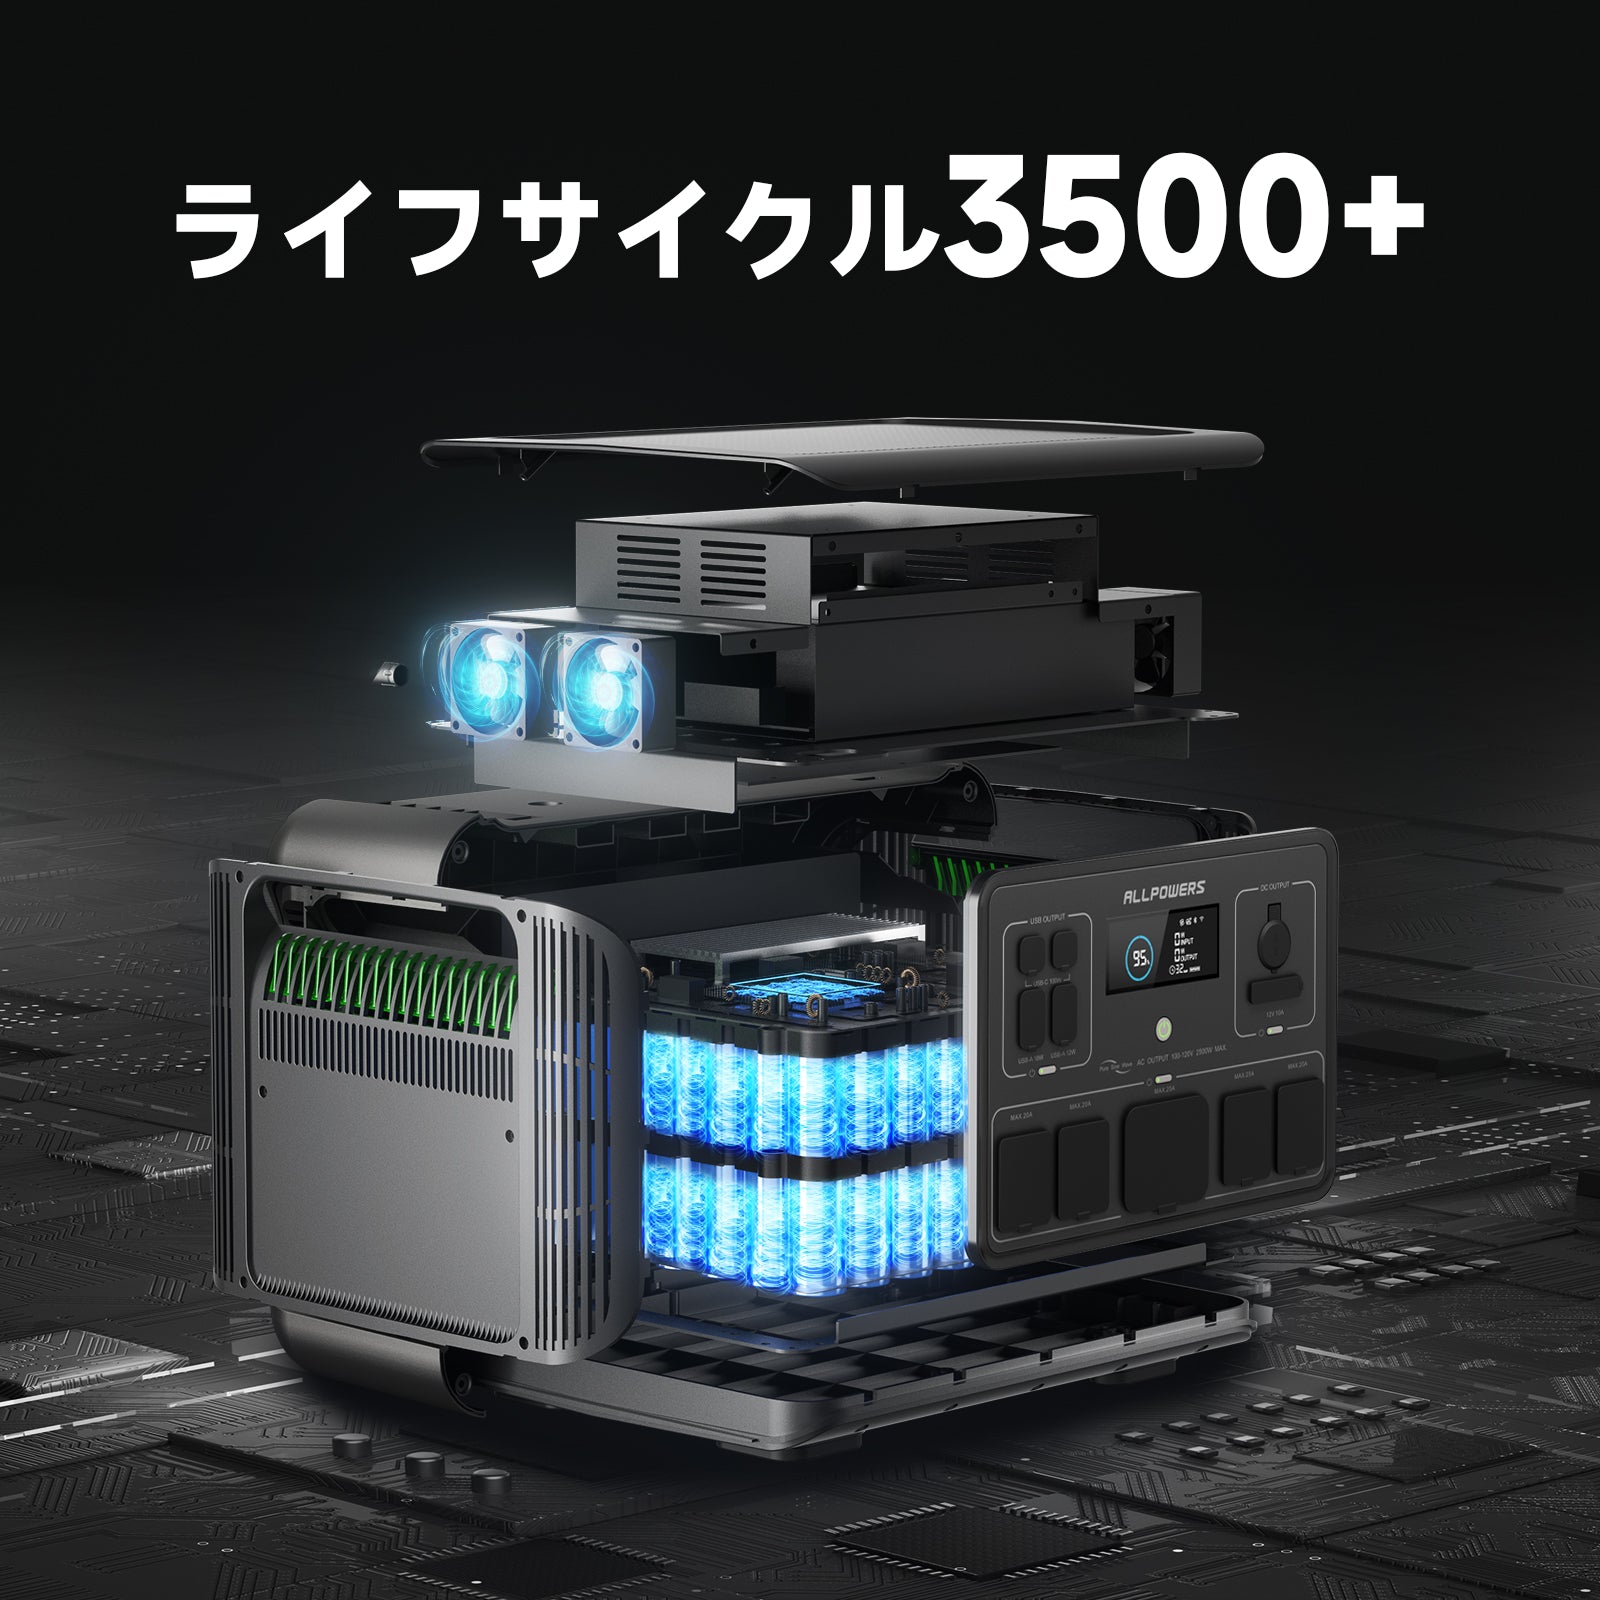 ALLPOWERS大型ポータブル電源R2500（2016Wh／2500W） – ALLPOWERS公式 